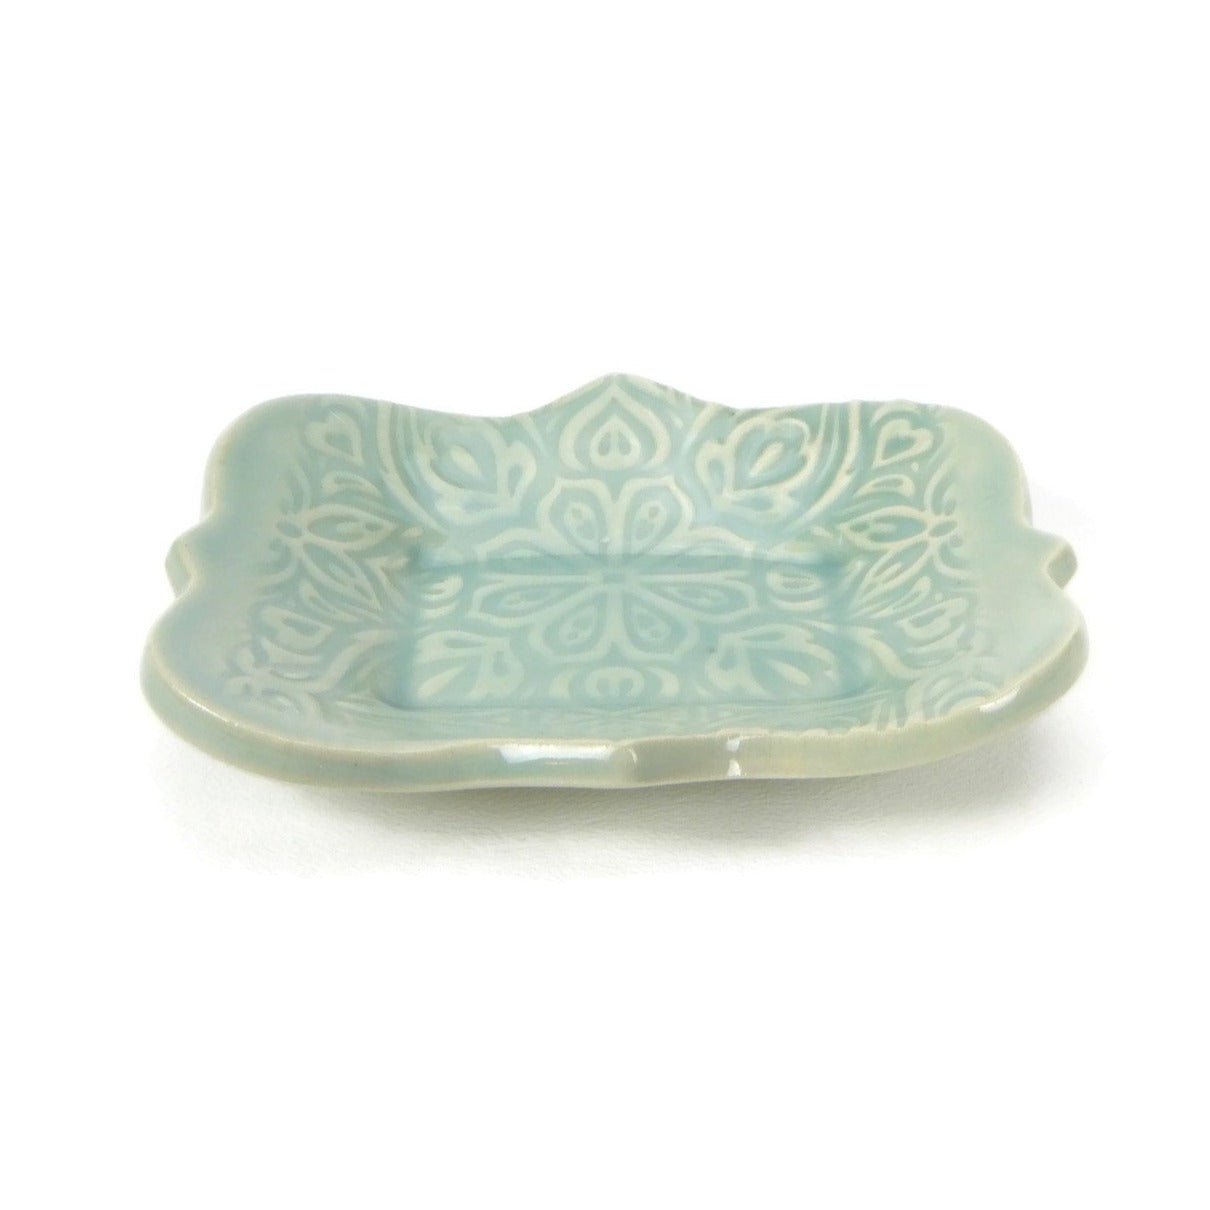 Large Aqua Scalloped Trivet with Forest Patterning